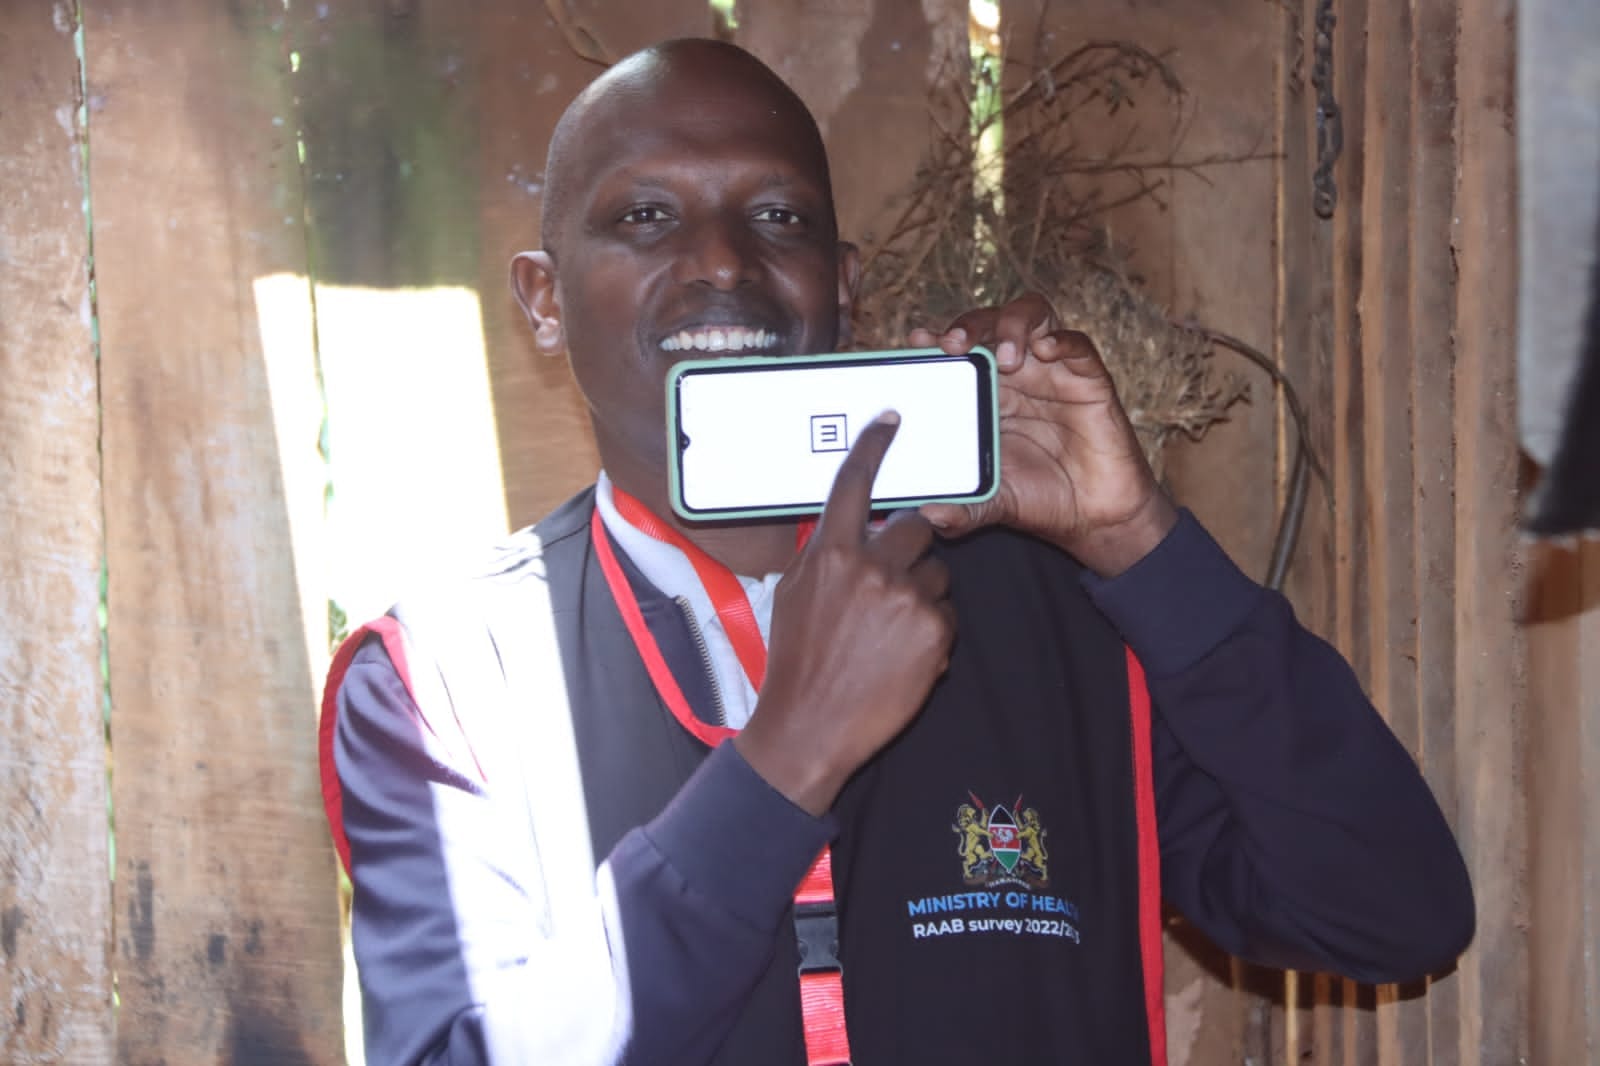 Dr Hillary Rono from Peek holds up a phone displaying the Peek Vision visual acuity test. He is swiping the phone and he wears a vest with the Ministry of Health Kenya logo which also says RAAB survey 2022/2023